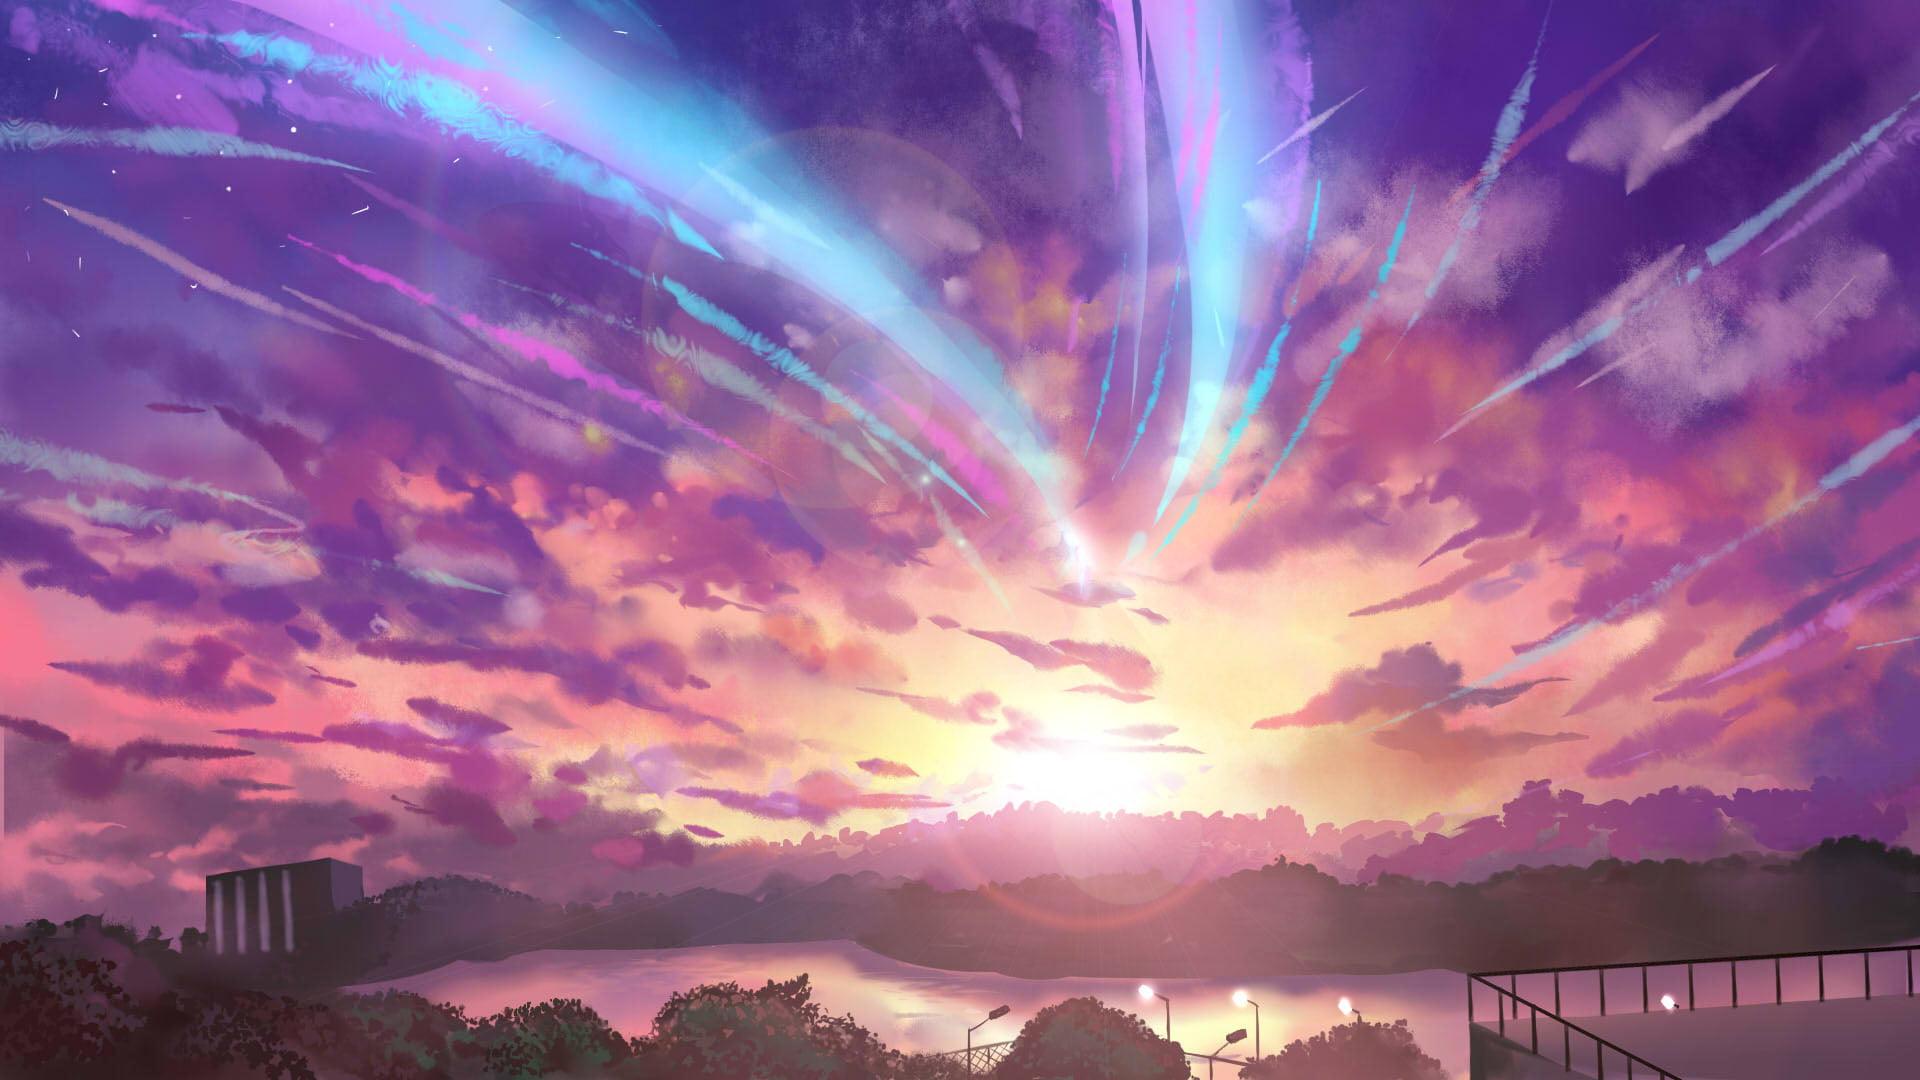 Wallpaper 1920x1080 Your Name